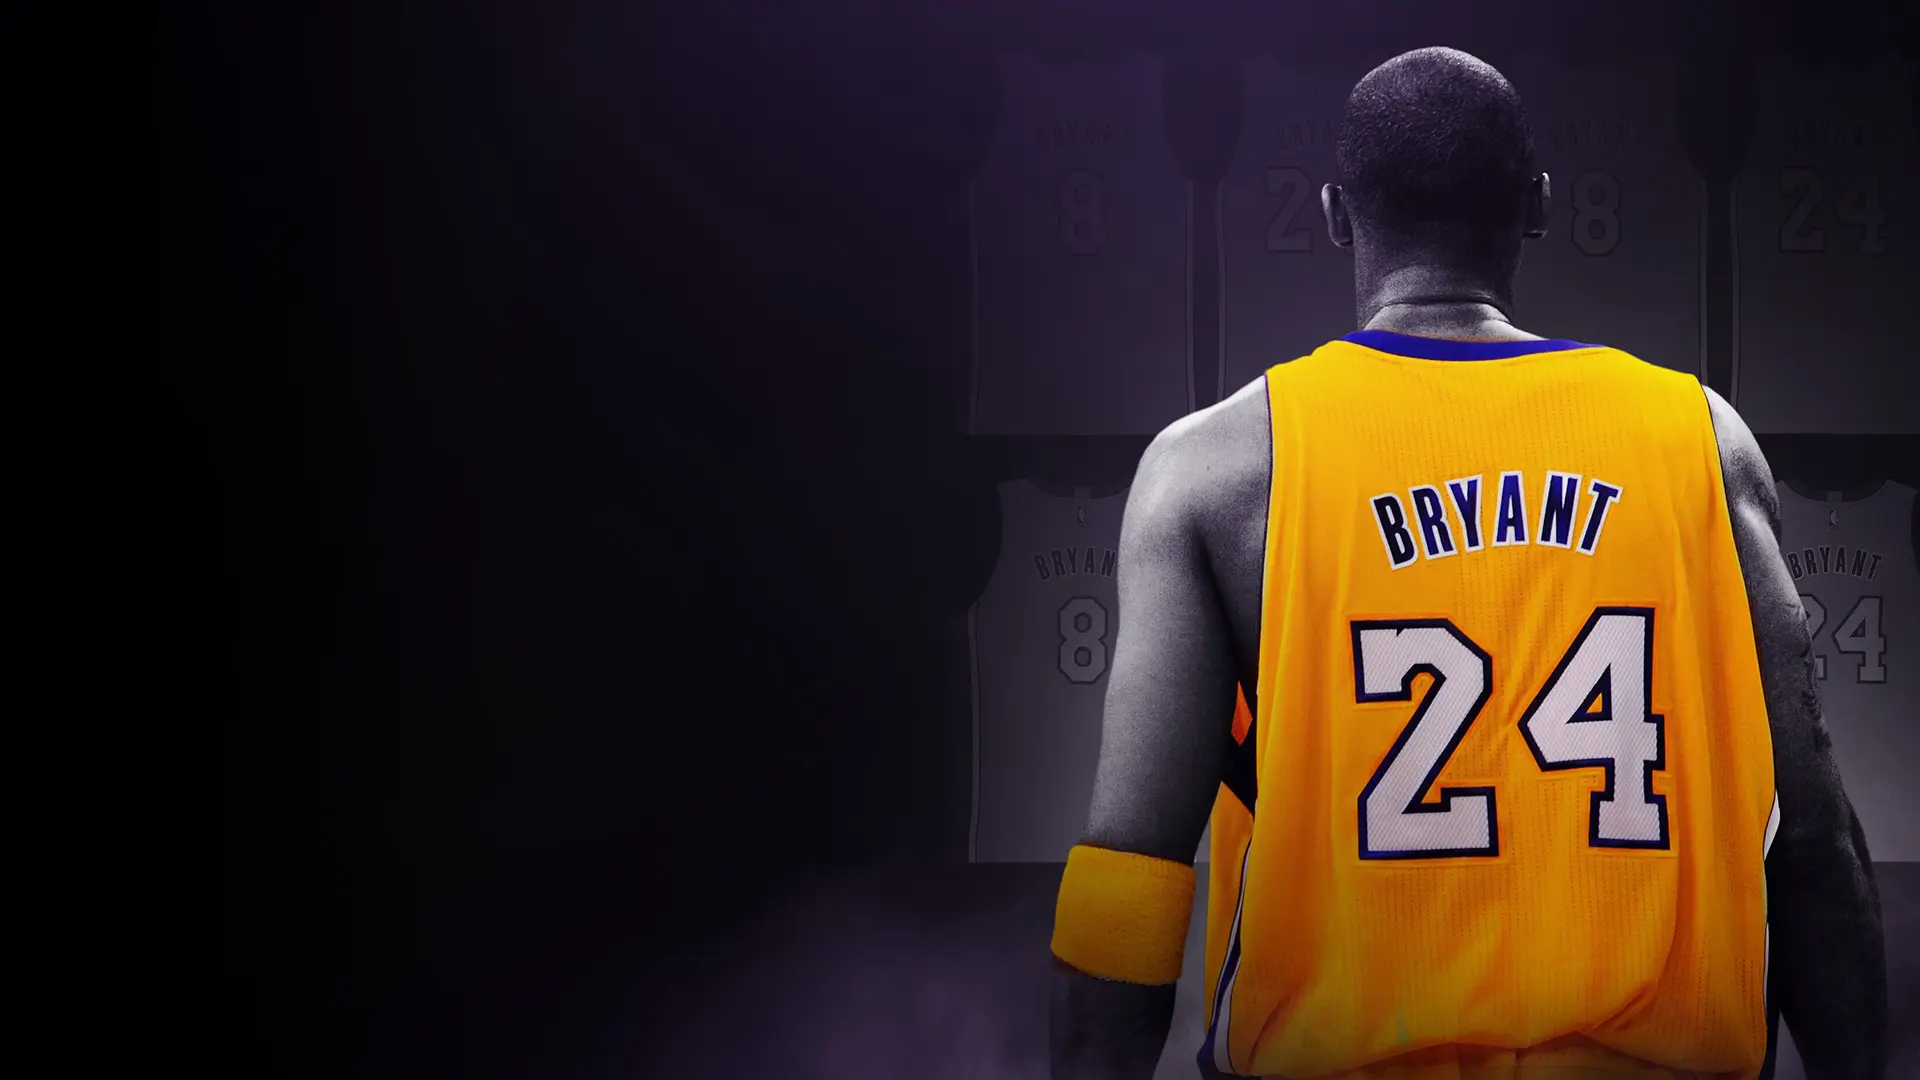 Steph Curry pays Homage to Kobe Bryant: Pioneering the Future of Basketball